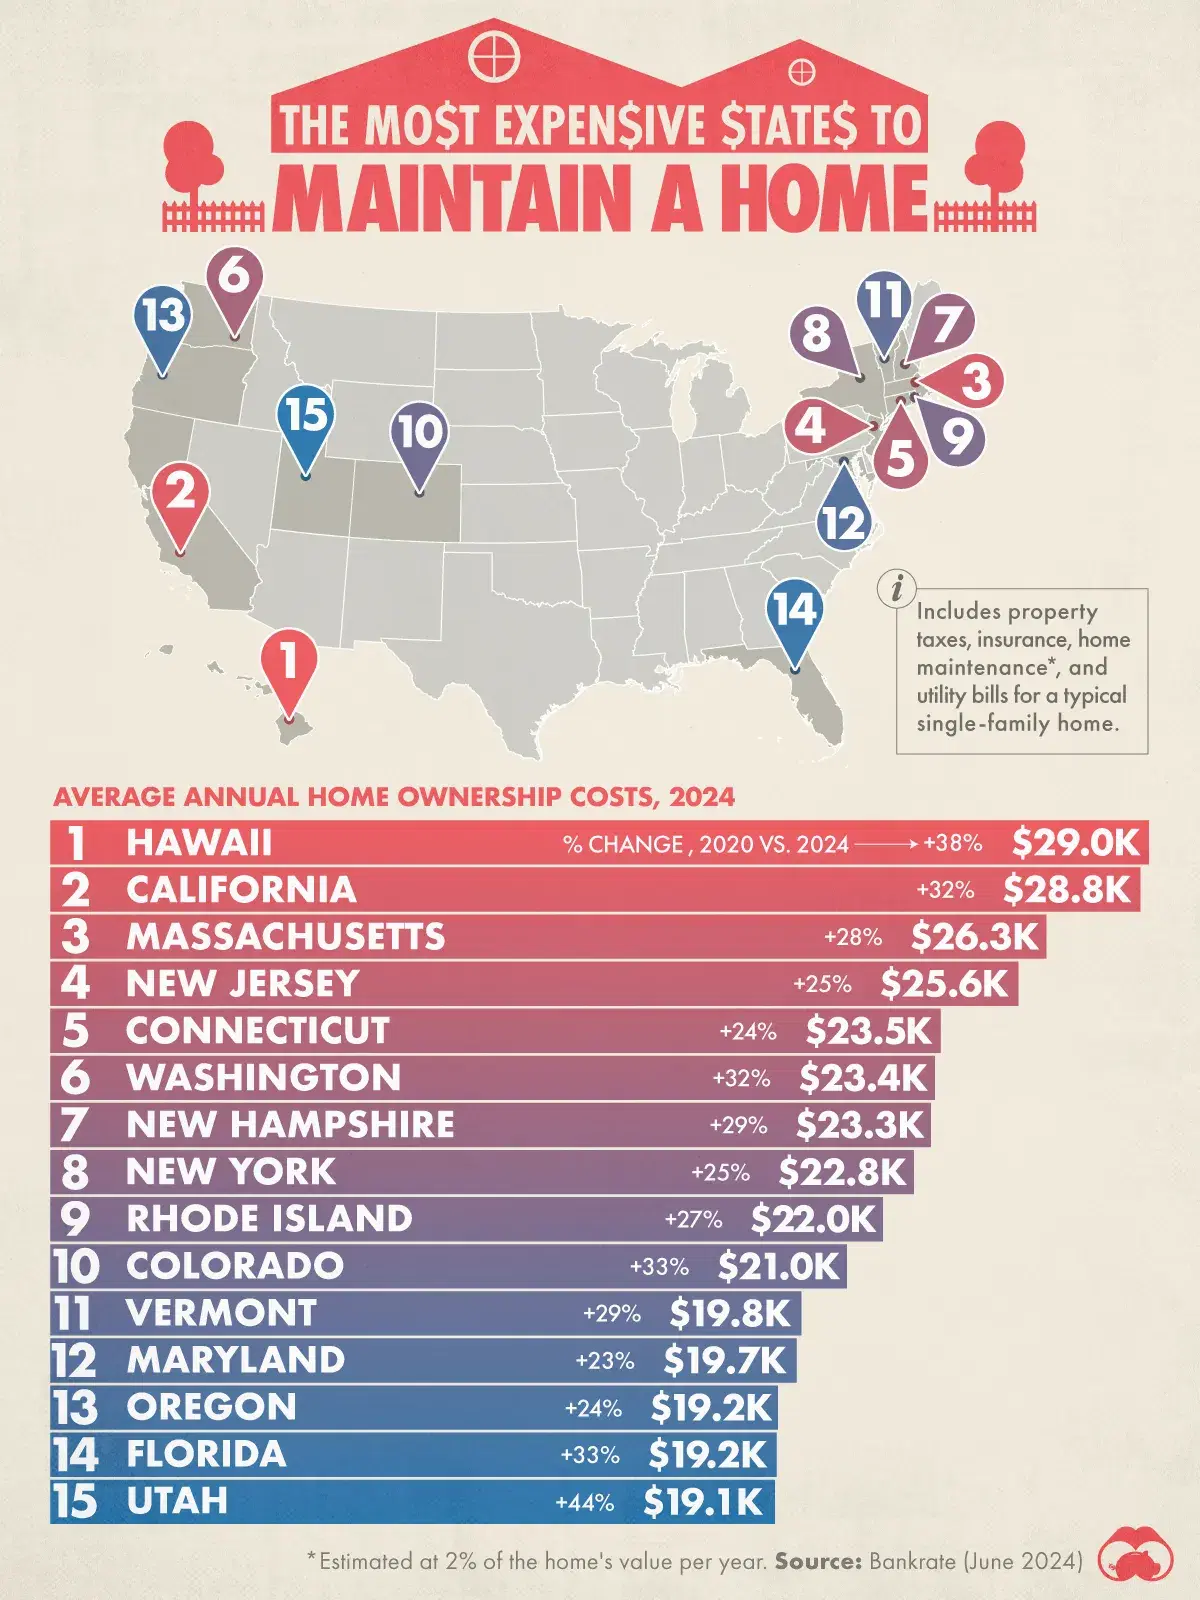 Hawaii is the Most Expensive State to Maintain a Home